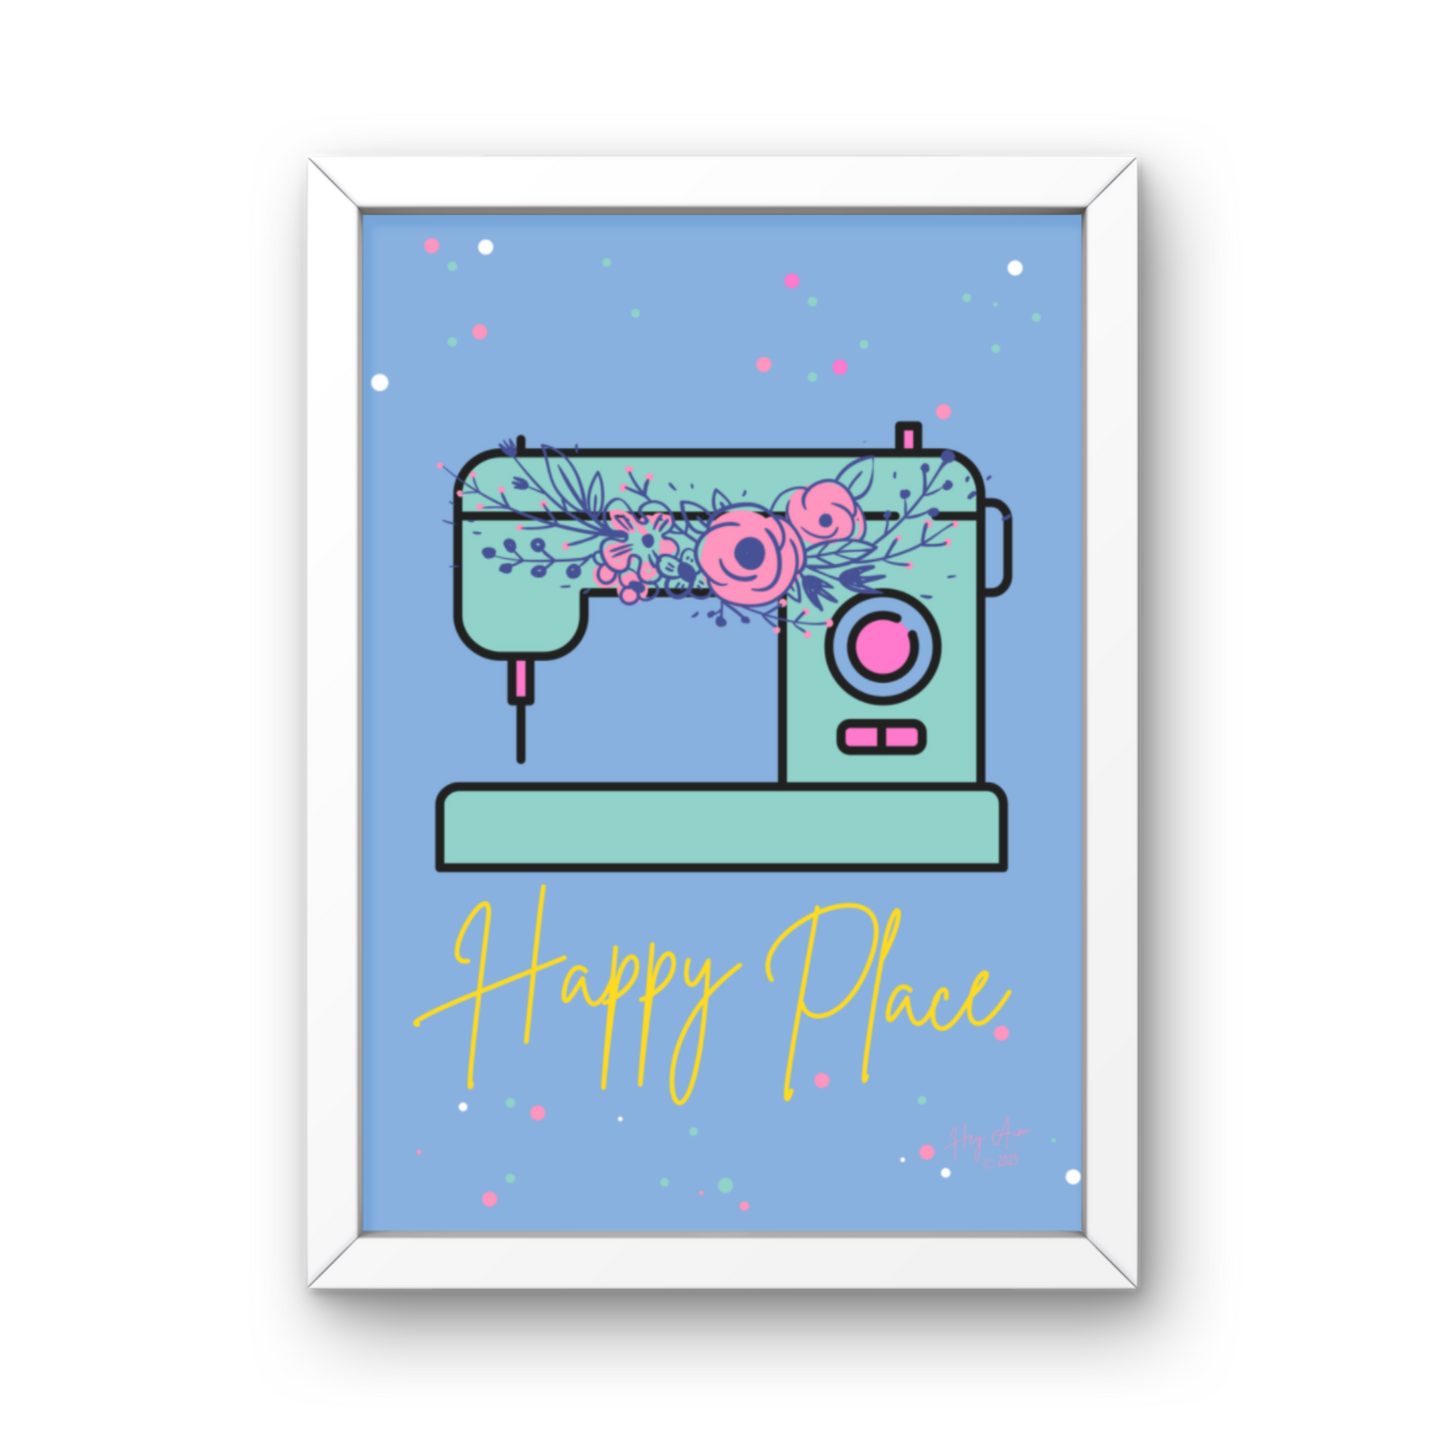 Happy Place | Digital Wall Art | Download Only | A3, A4, A5, A6 Sizes